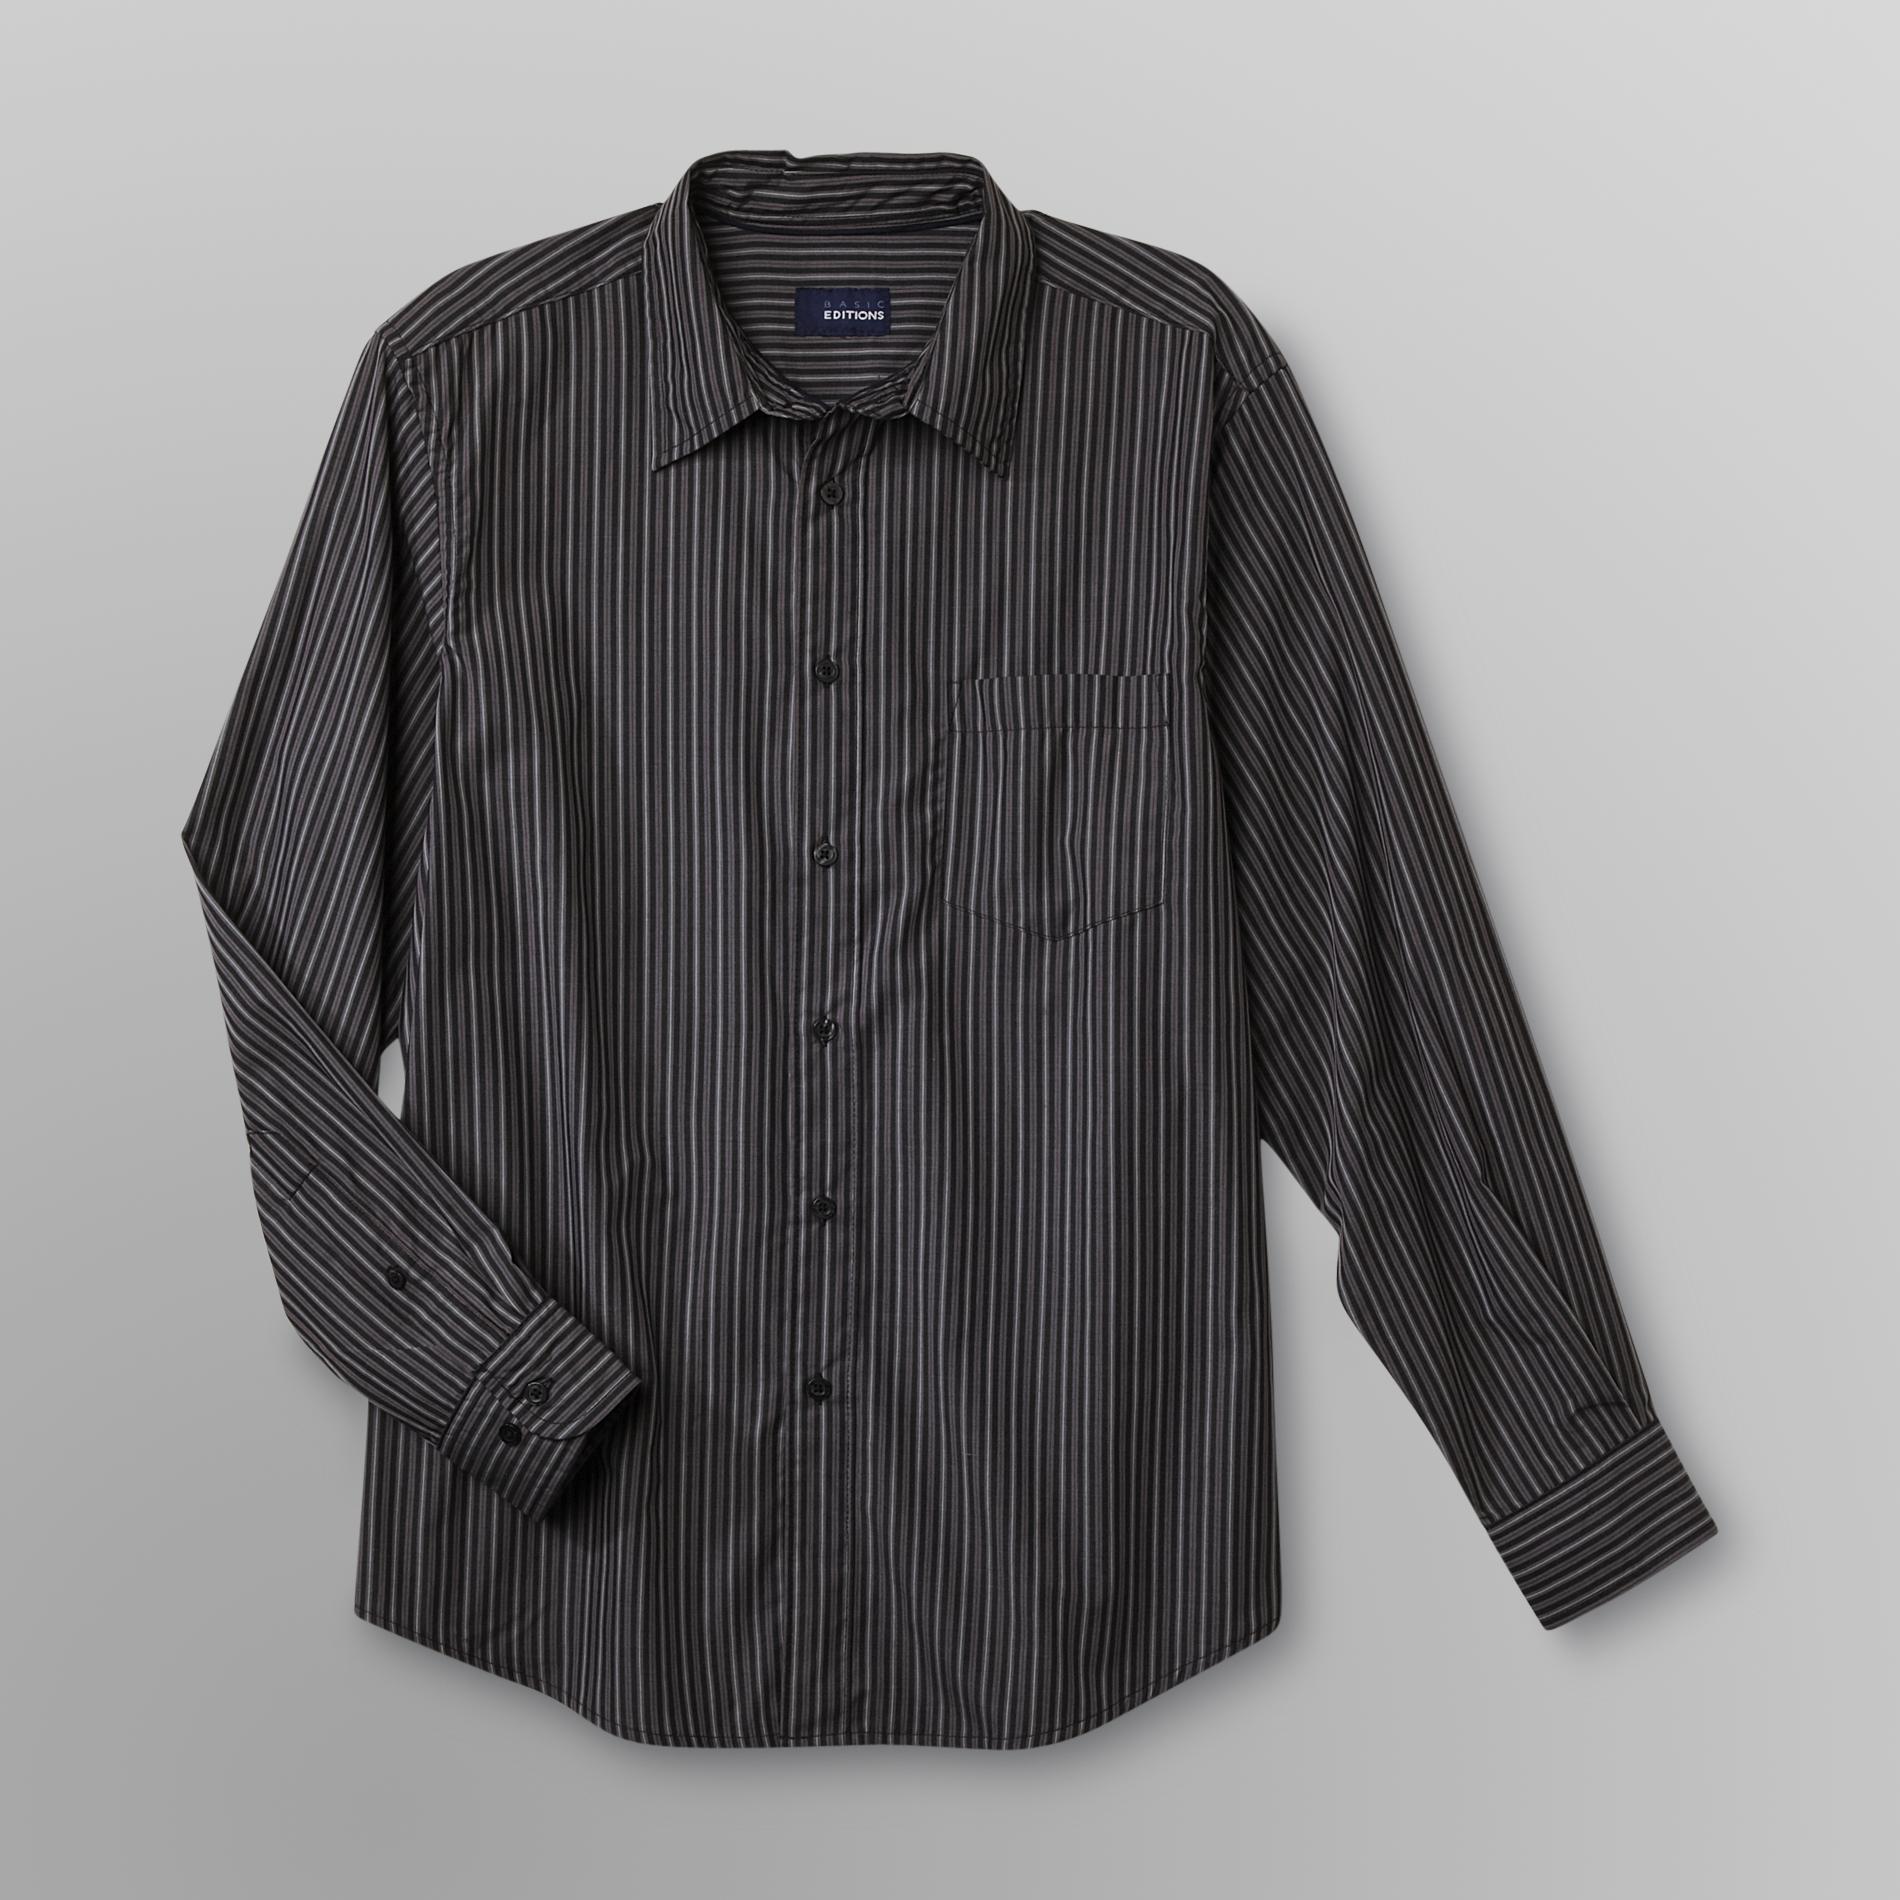 Basic Editions Men's Easy Care Shirt - Striped